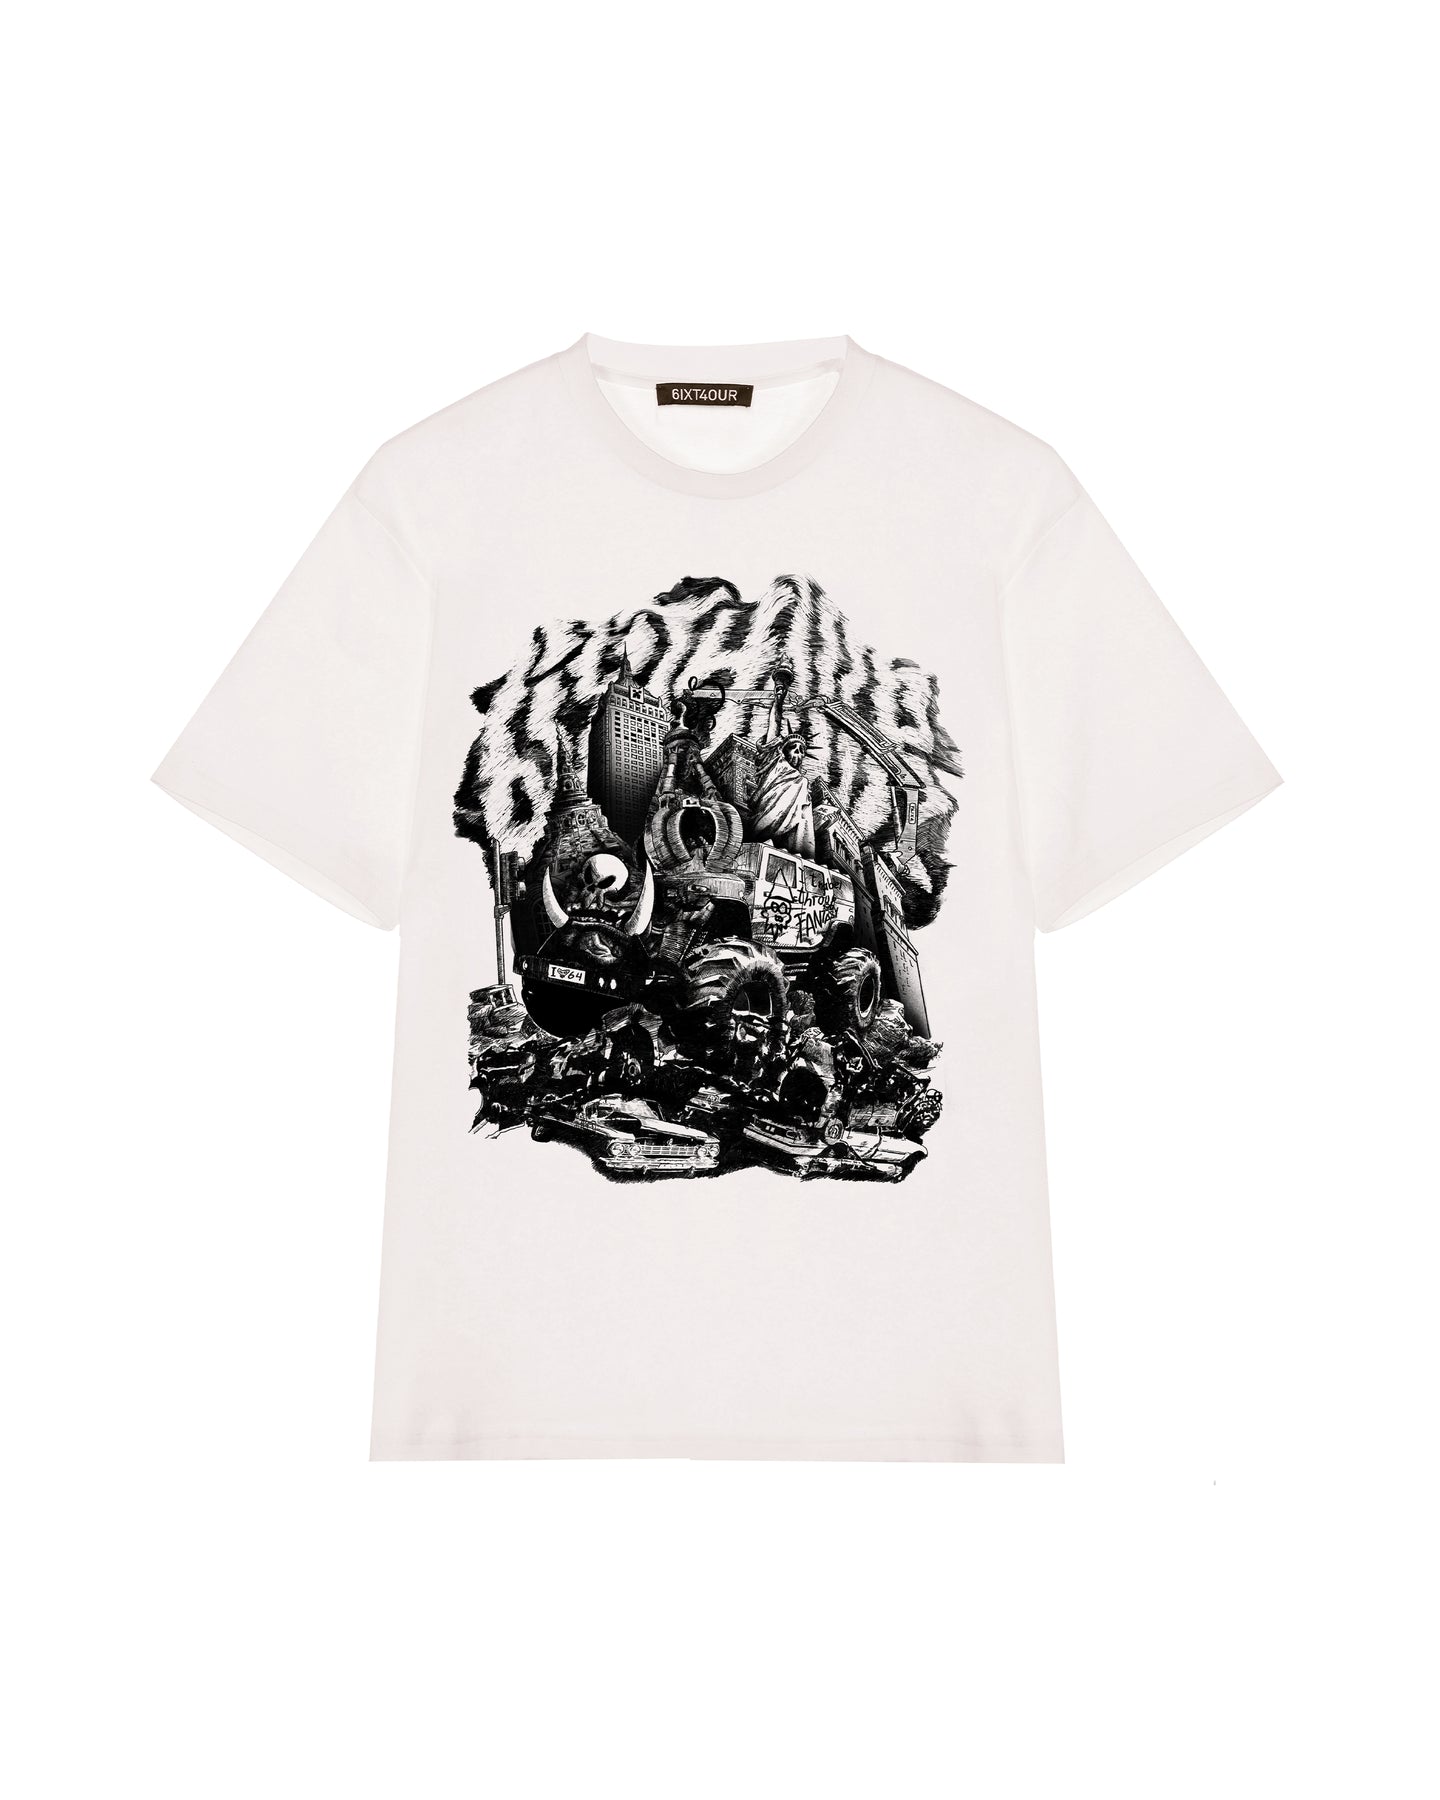 SCRAPPING TEE